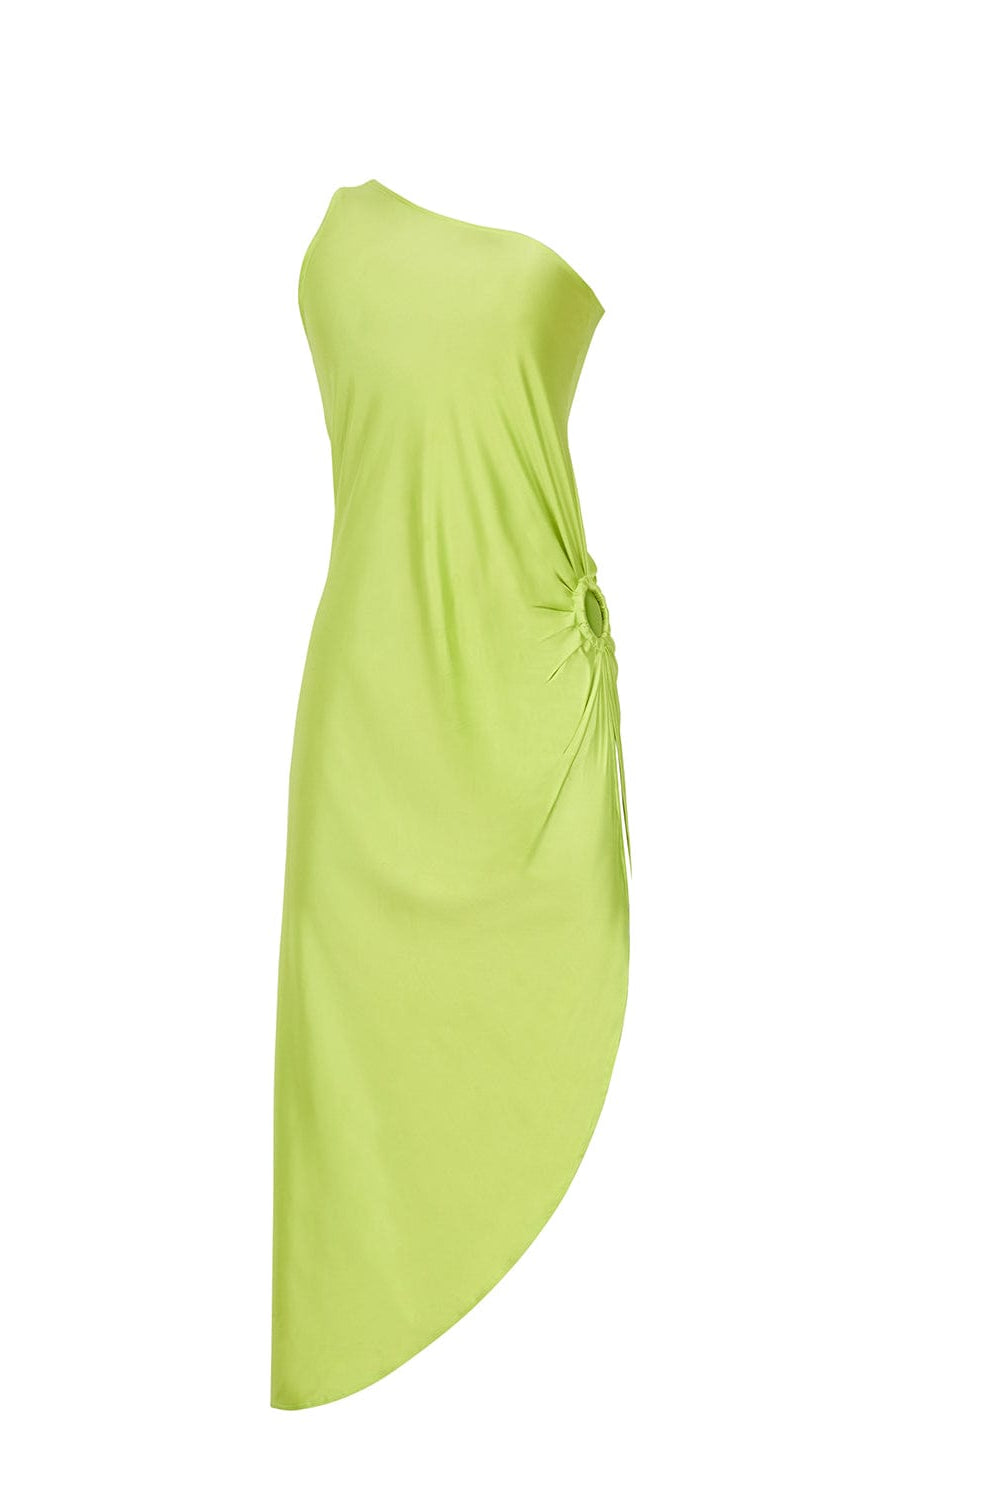 A lime green one-shoulder dress with side slit and ring detail. Featured against a white wall background.